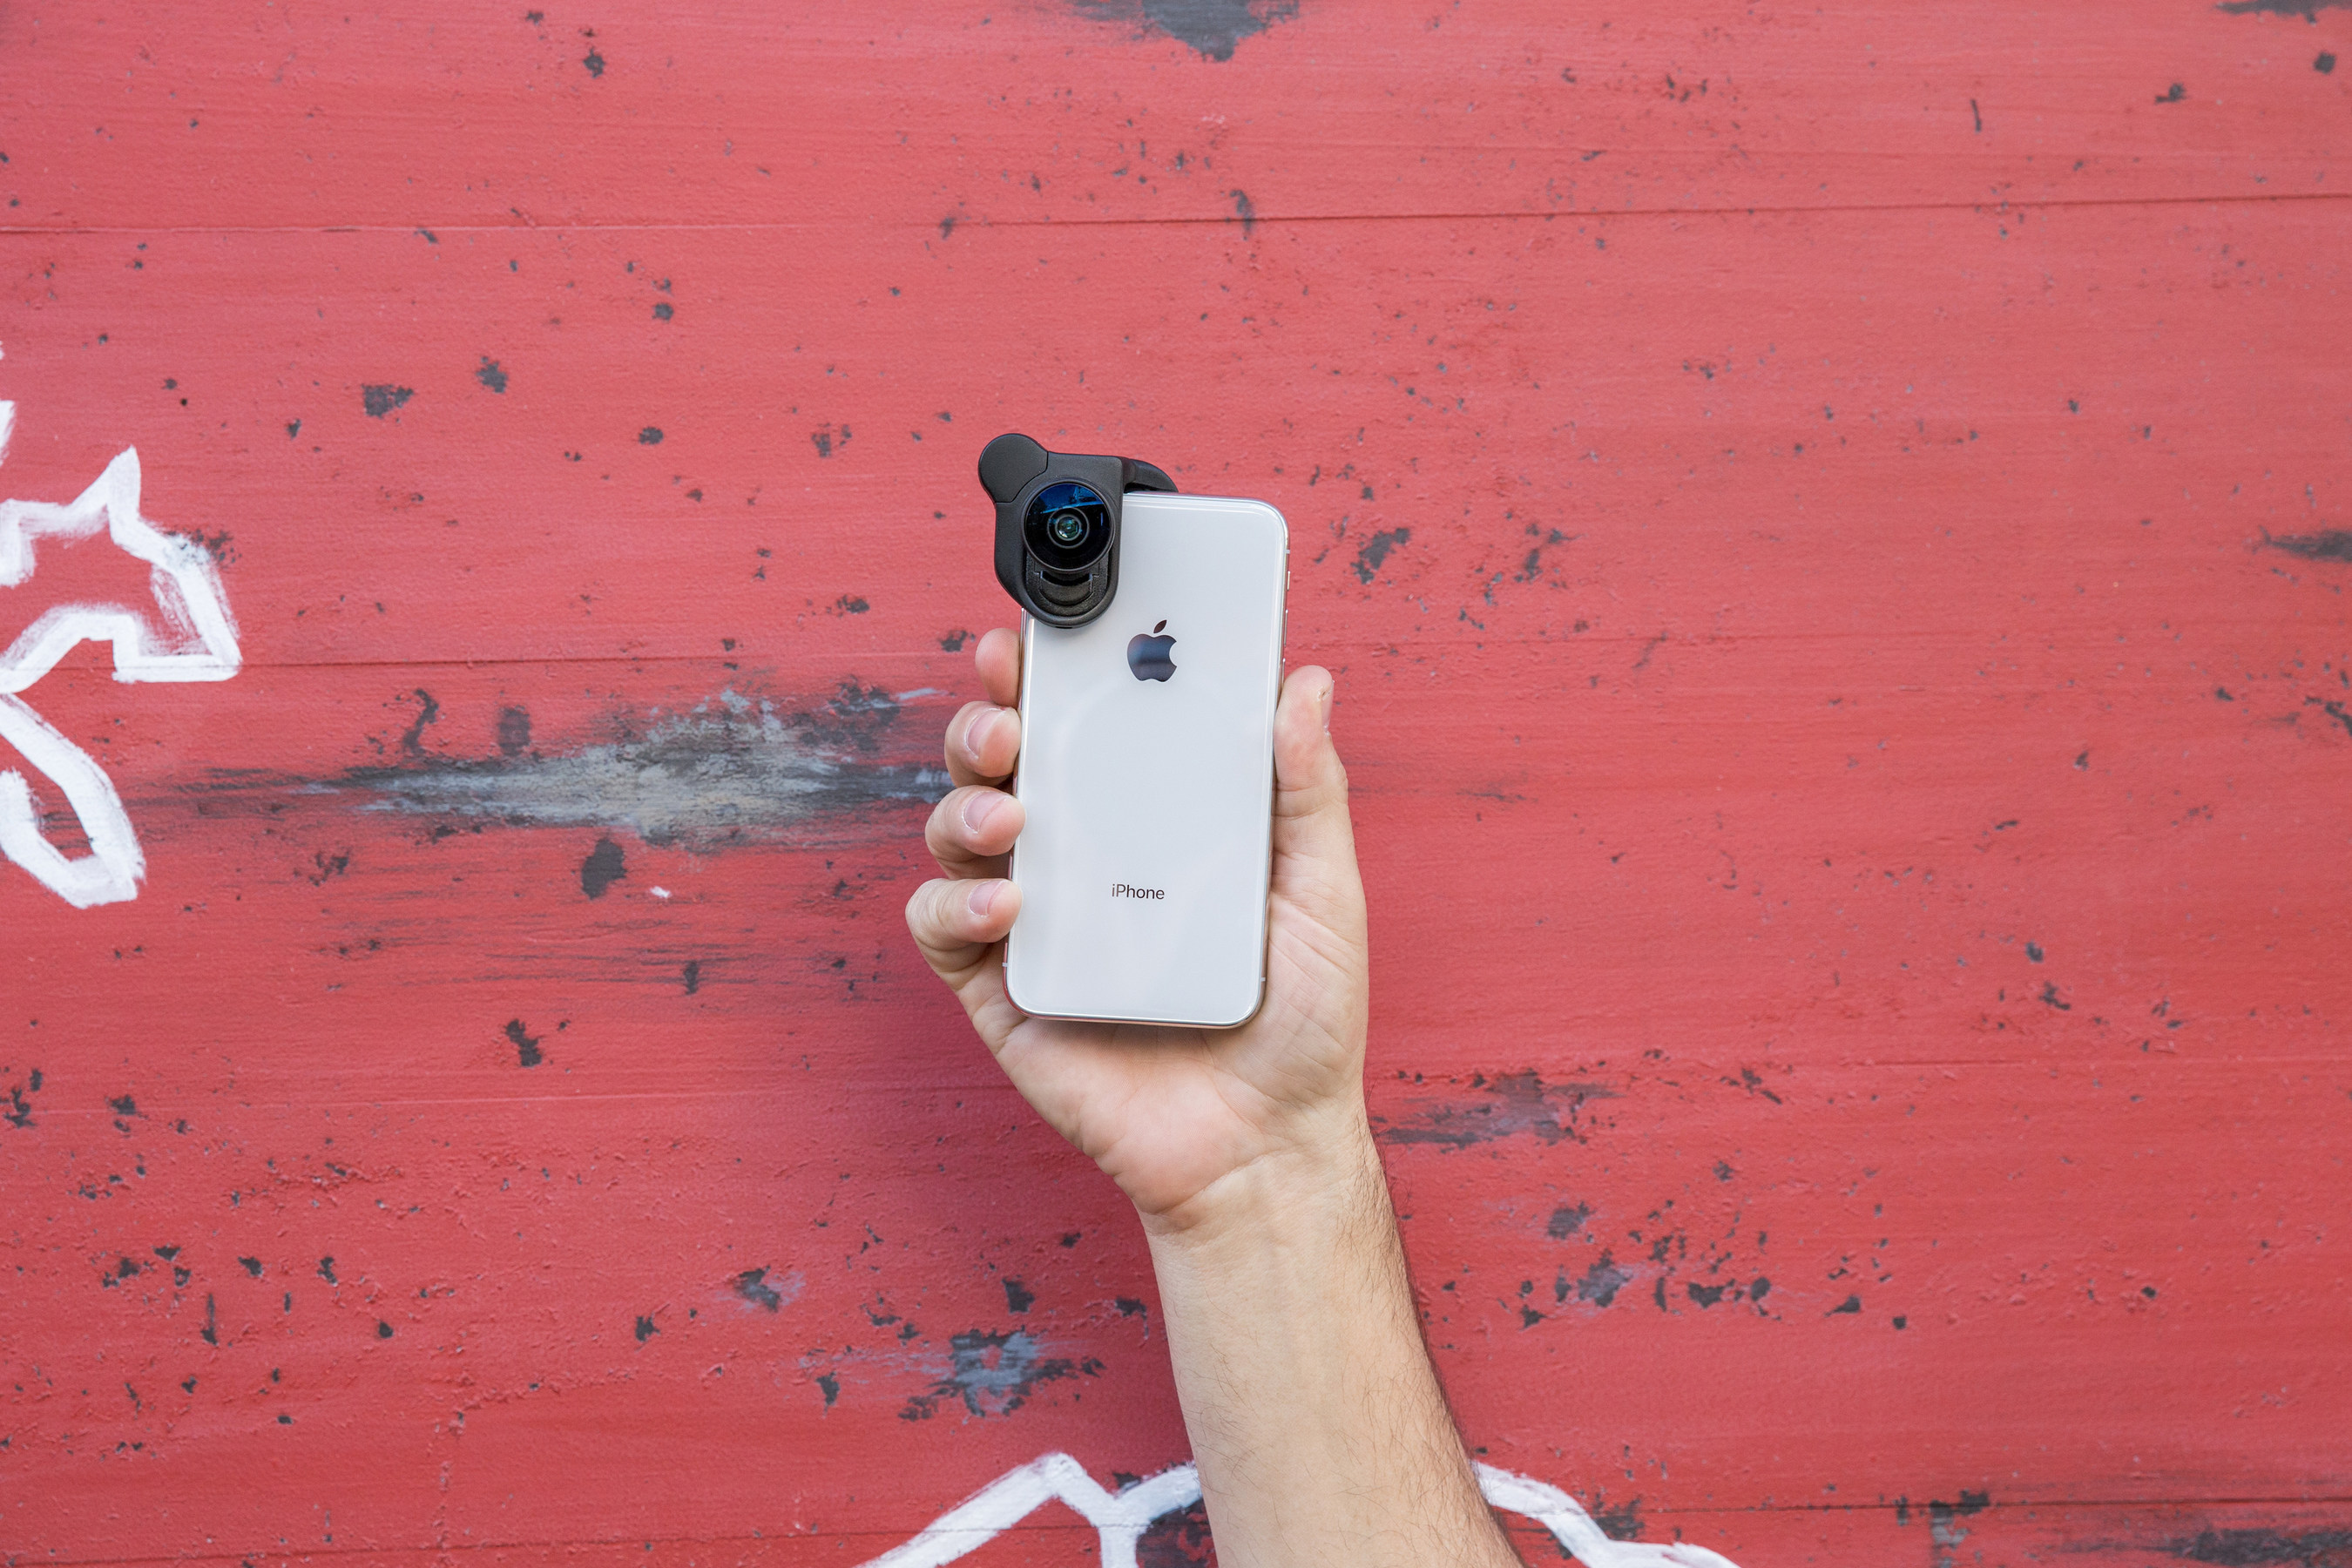 olloclip Introduces All-New Mobile Lens System for iPhone X